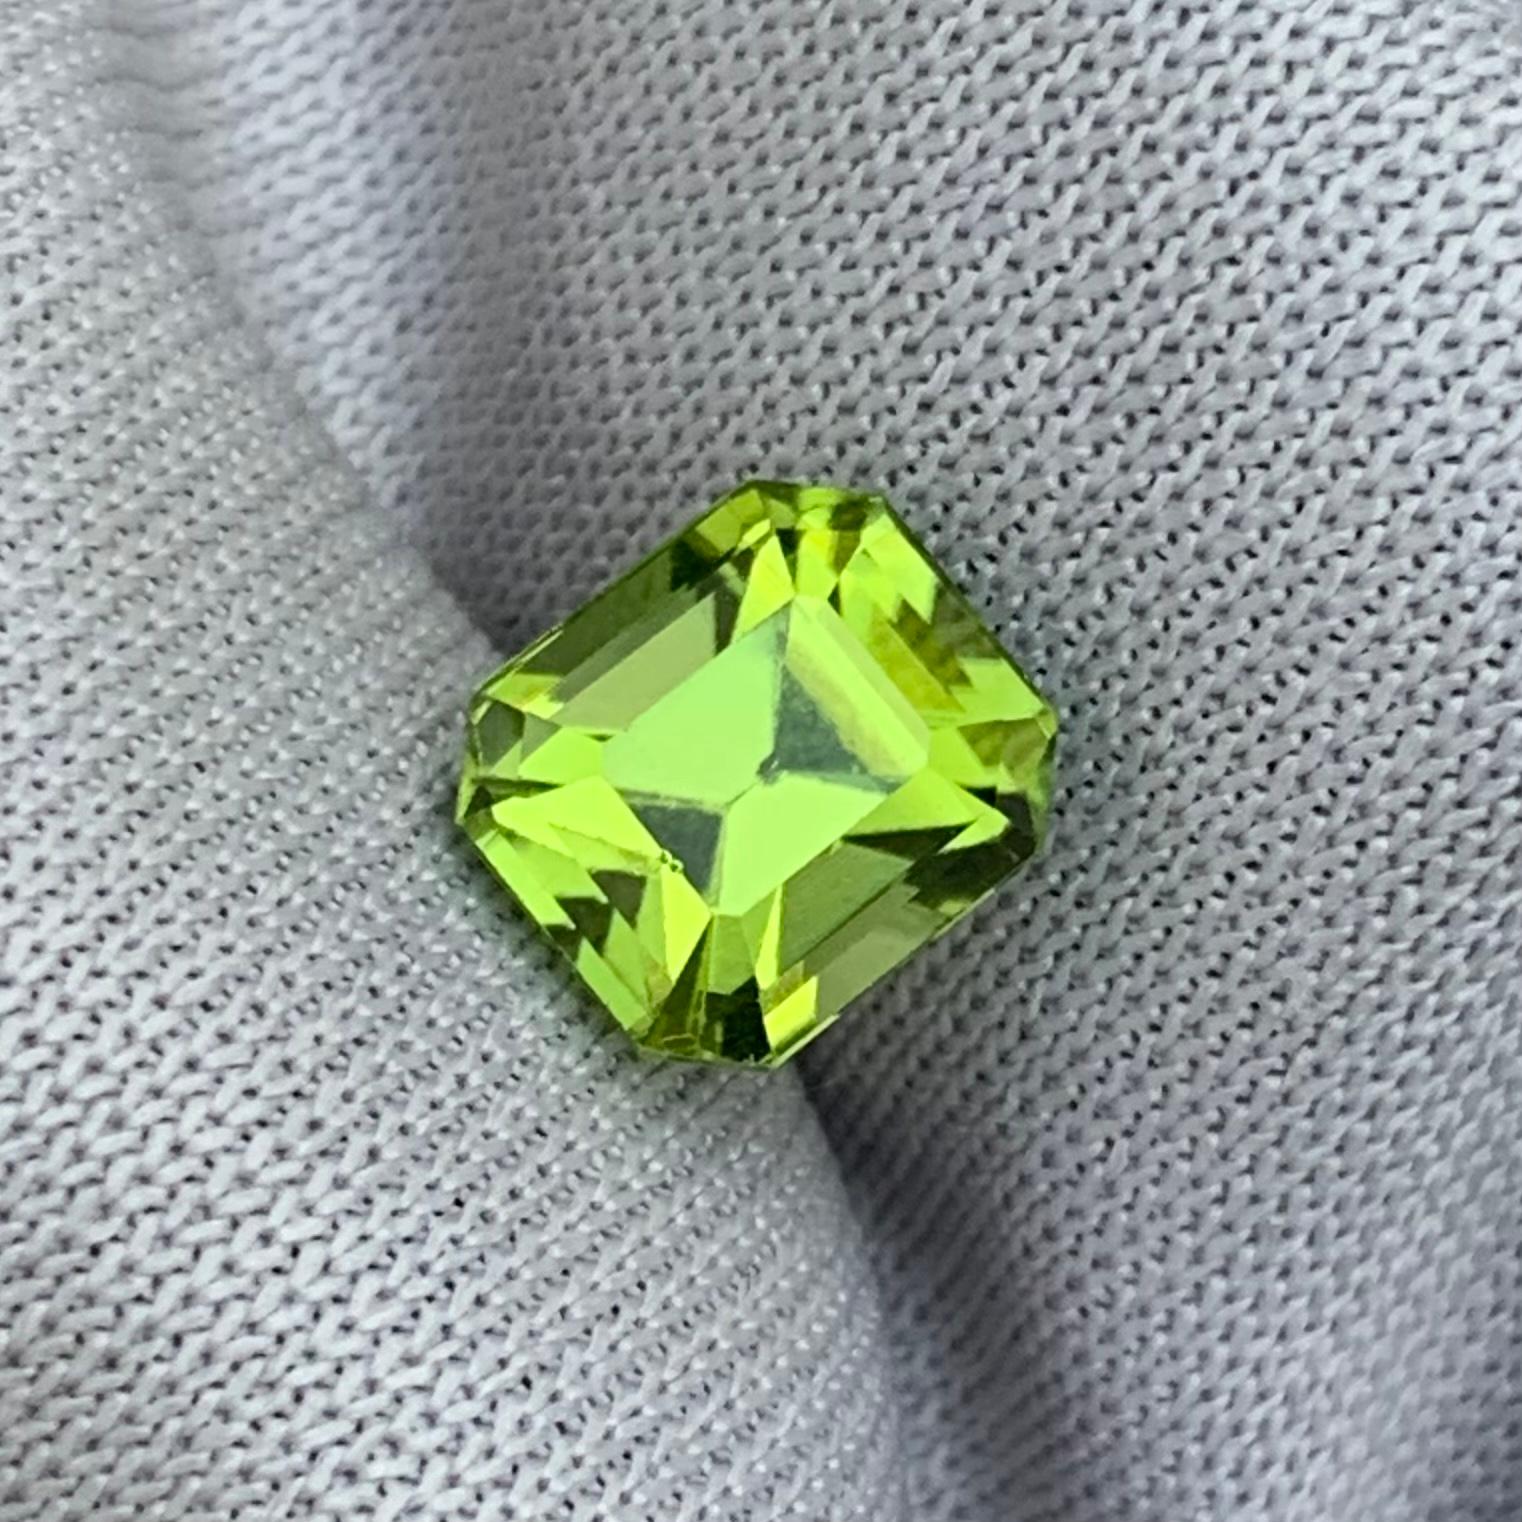 Gemstone Type : Peridot
Weight : 2.0 Carats
Dimension: 7.2x6.4x5.5 Mm 
Origin : Suppat Valley Pakistan
Clarity : Eye Clean
Certificate: On Demand
Color: Green
Treatment: Non
Shape: Emerald 
It helps cure diseases related to lungs, breasts,